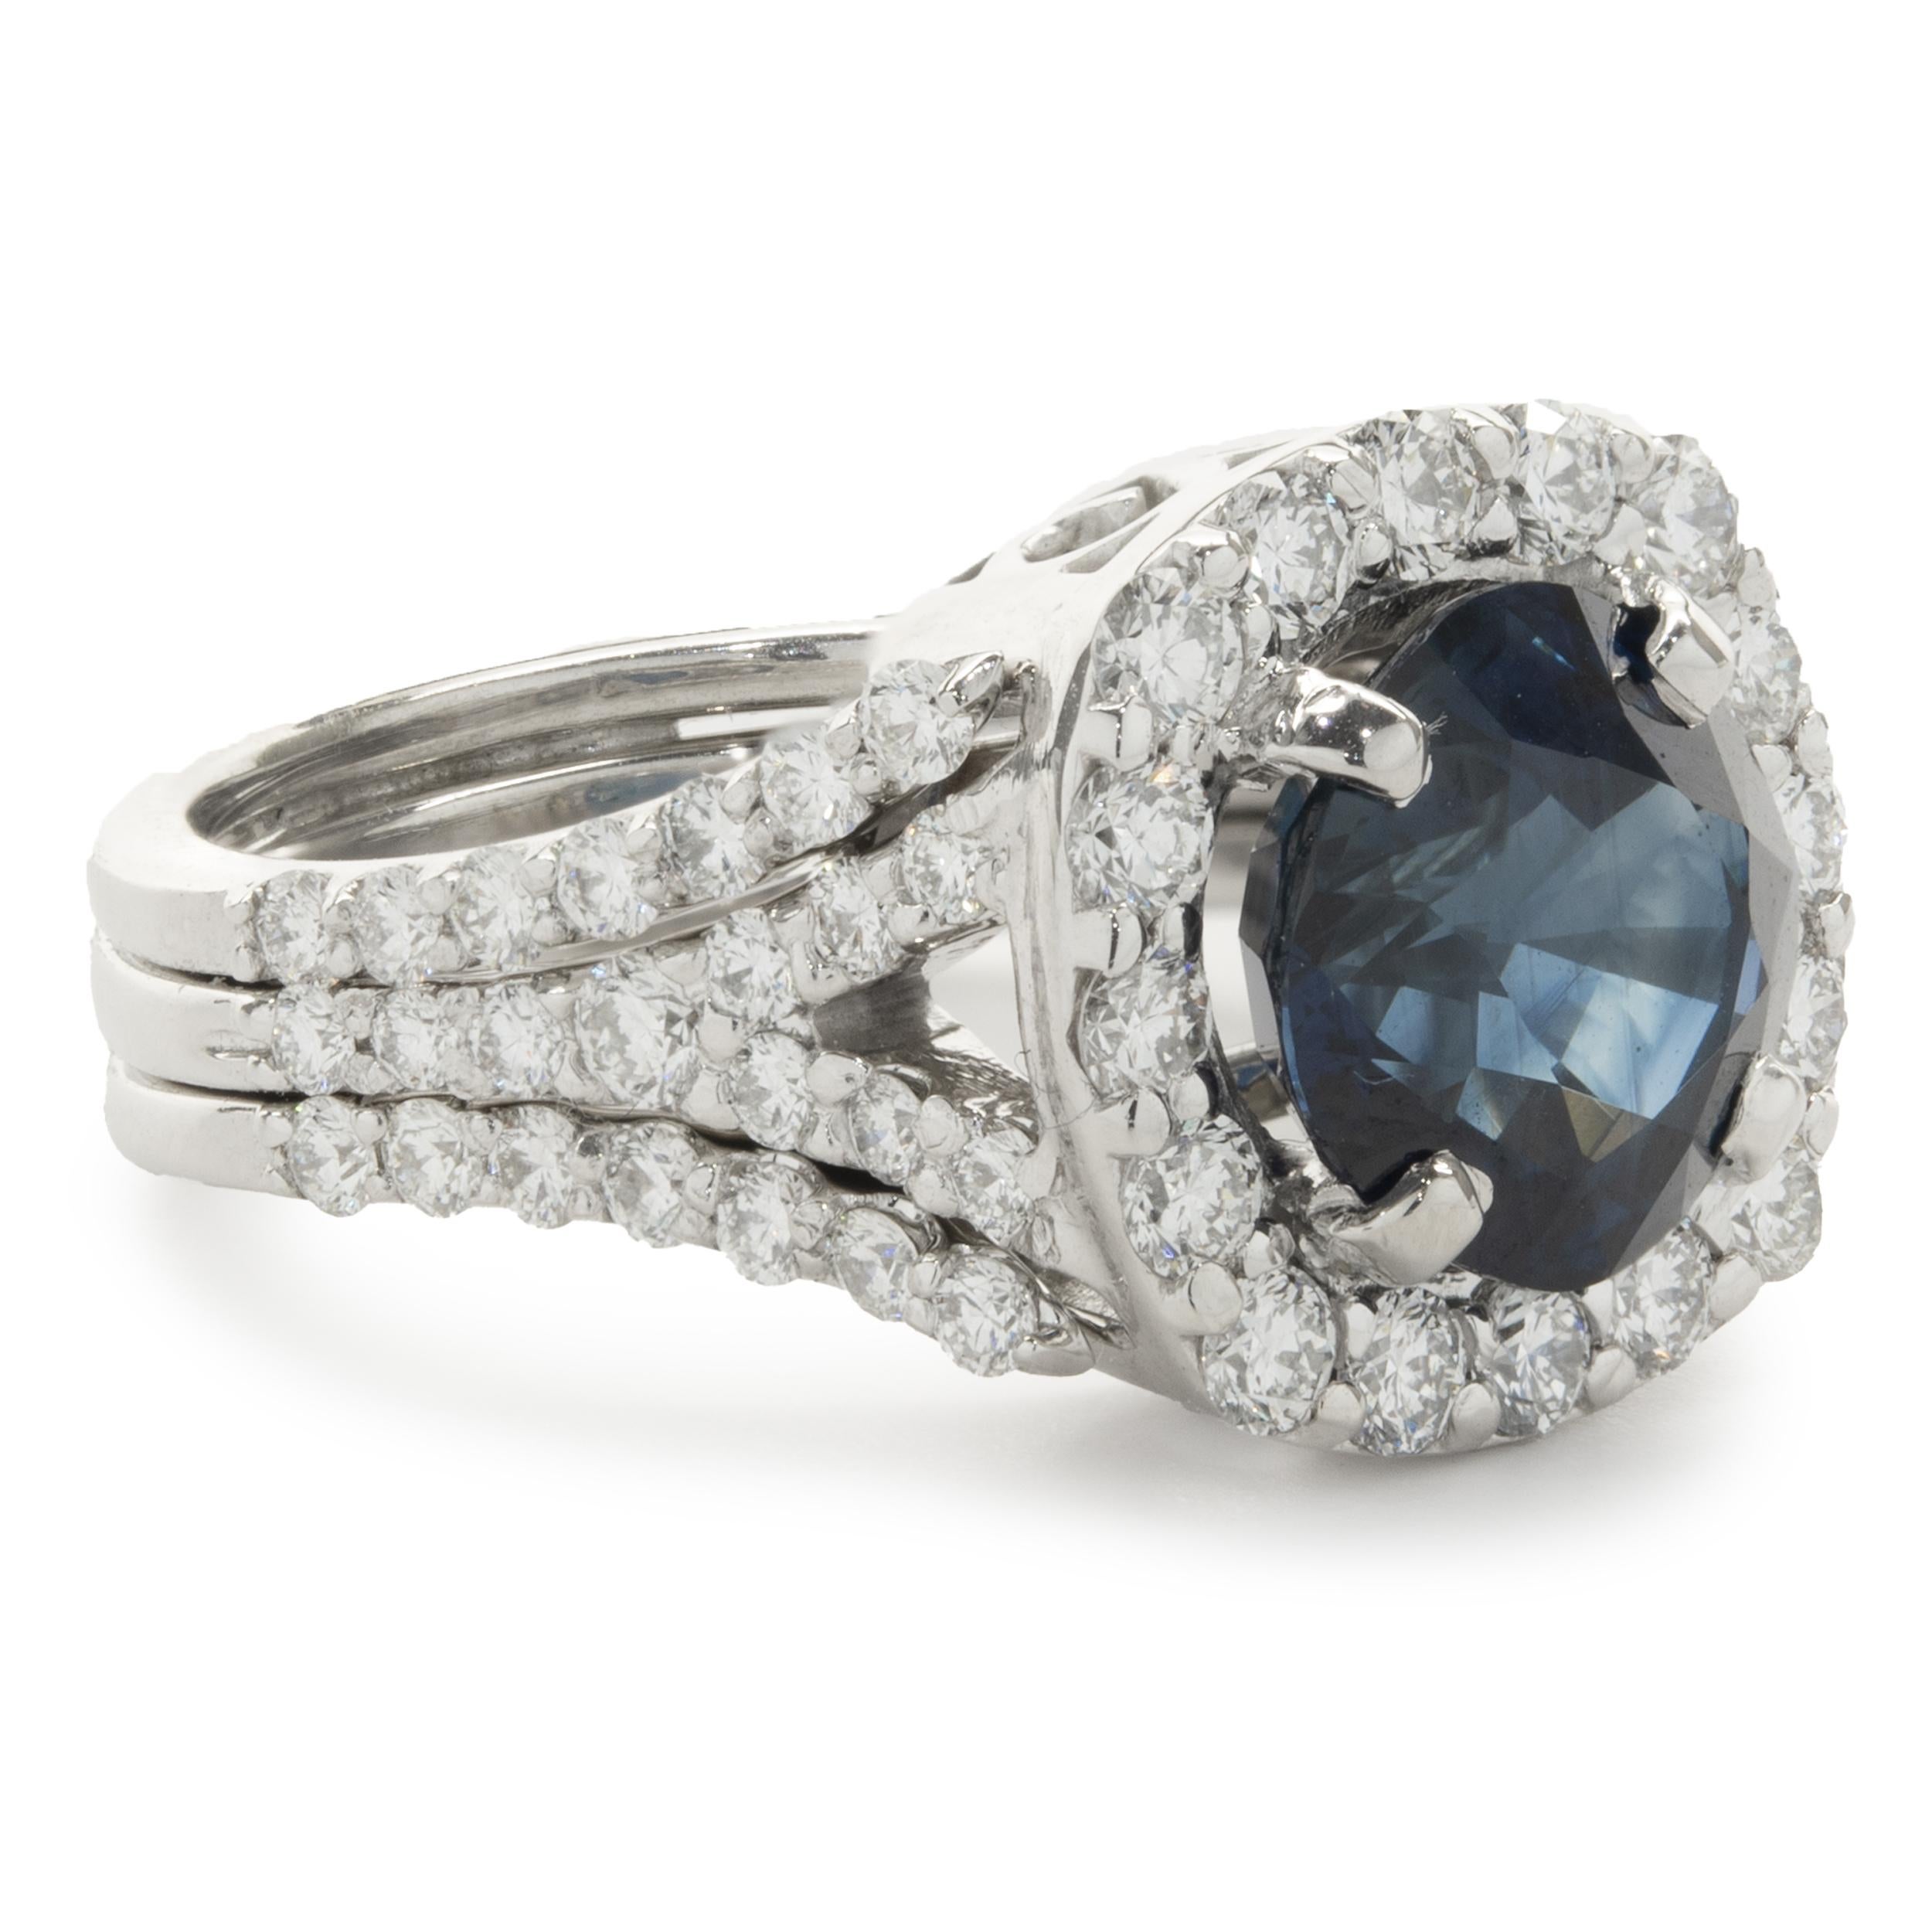 Designer: custom design
Material: 14K white gold
Diamond: 64 round brilliant cut = 1.64cttw
Color: G
Clarity: VS2
Sapphire: 1 round cut = 3.75ct
Color: Deep Royal Blue
Clarity: AA
Ring size: 6.5 (please allow two additional shipping days for sizing